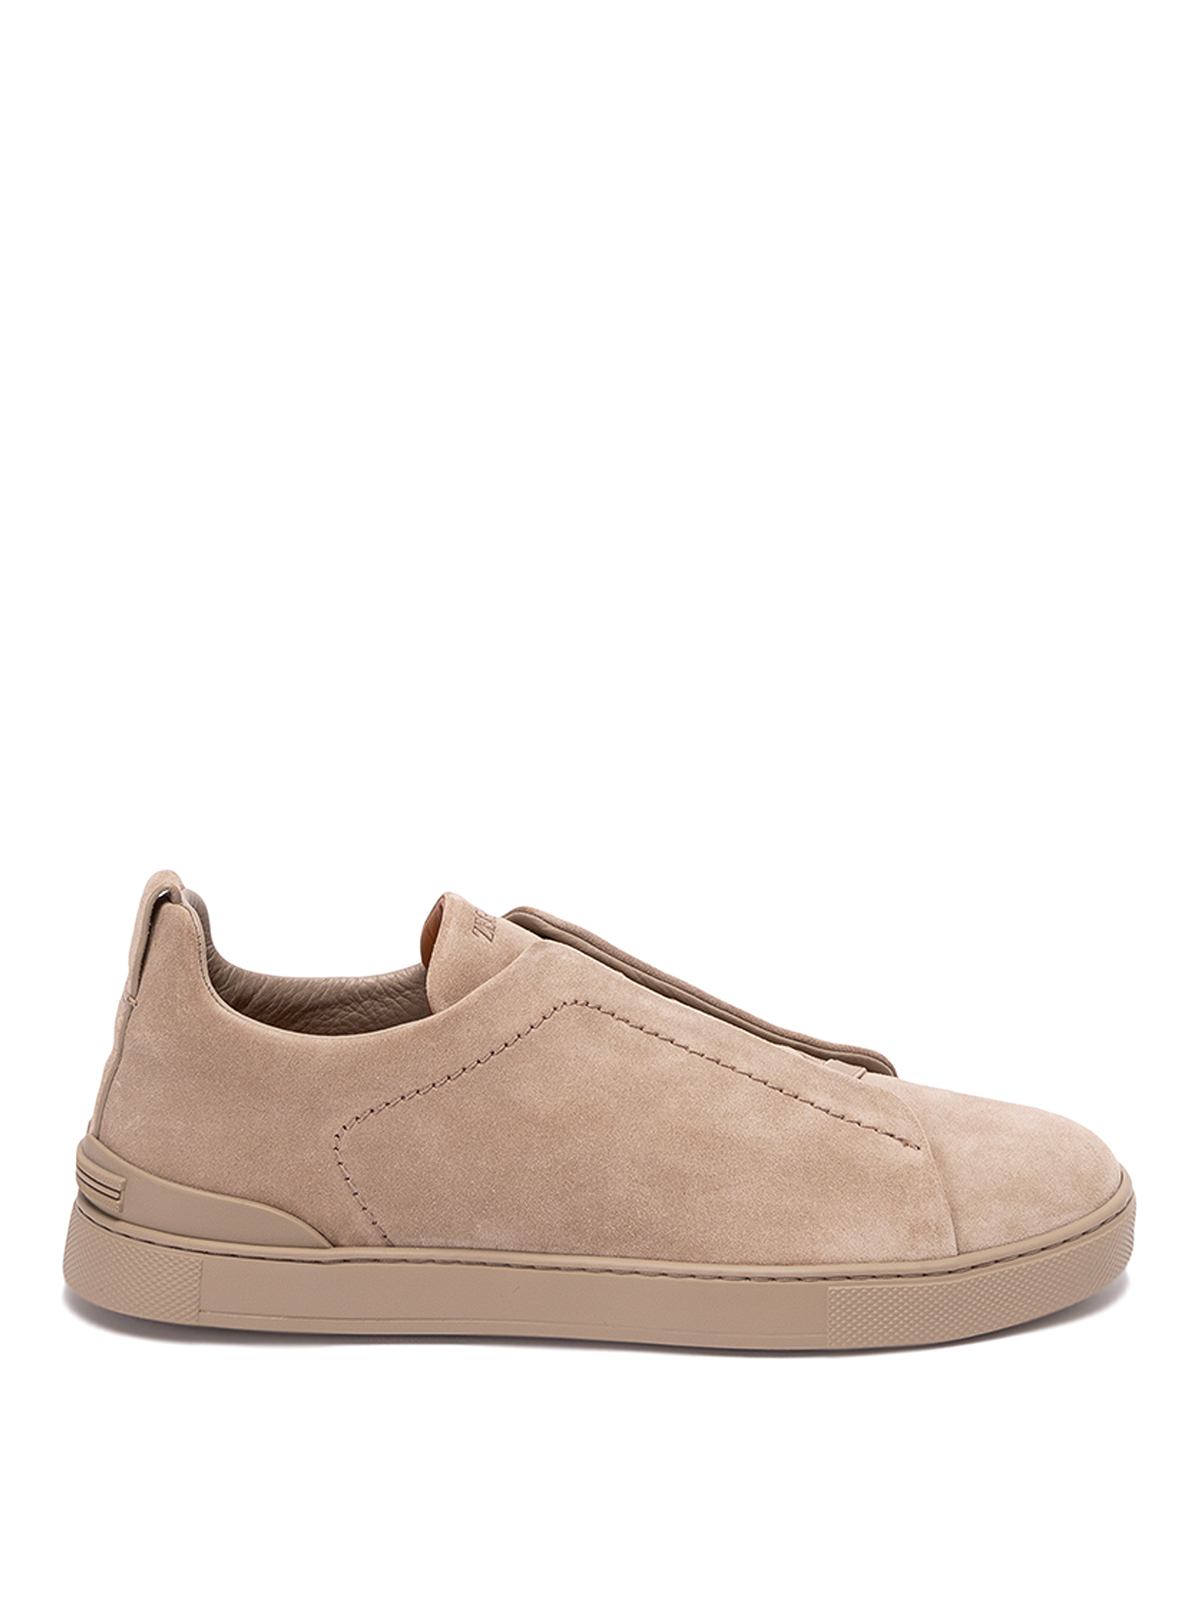 Trainers Zegna - `triple stitch` leather low-top sneakers